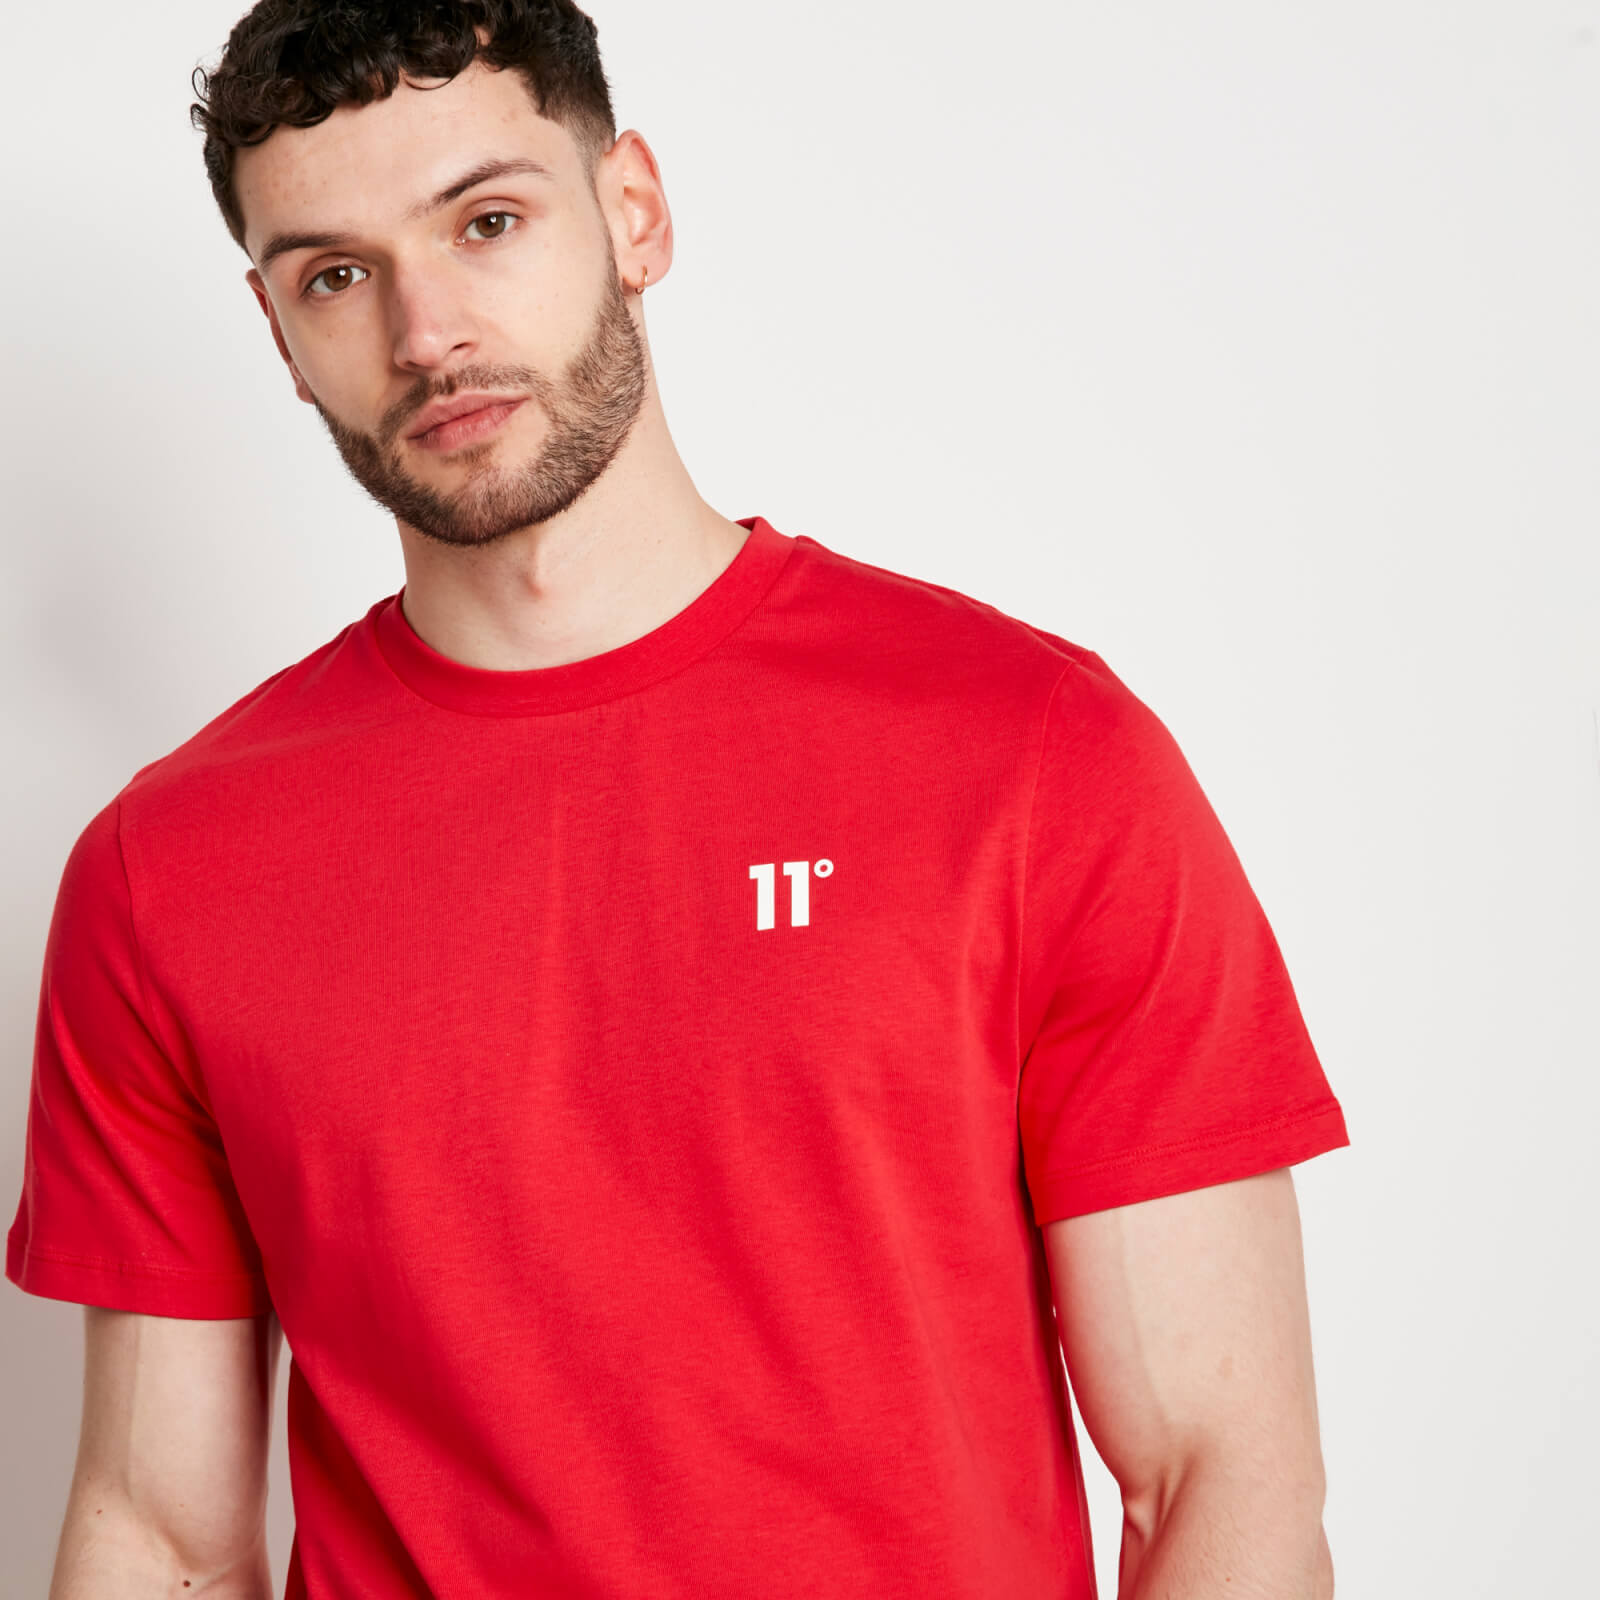 11 Degrees Muscle Fit T-Shirt – Goji Berry Red